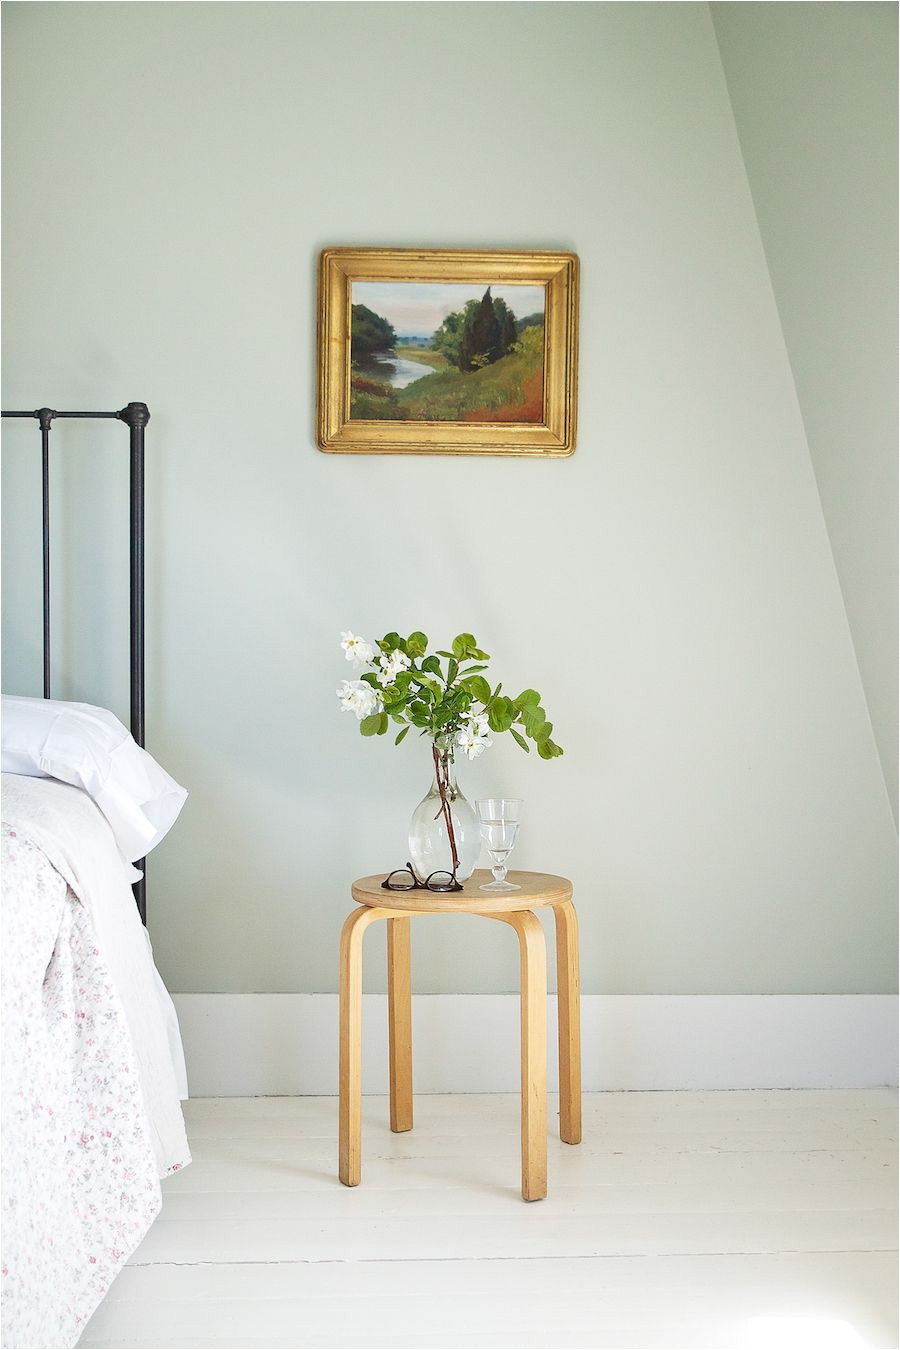 Rooms Painted In Farrow and Ball Cromarty Cape Cod Summer Bedrooms Refreshed with Farrow Ball Paint Walls